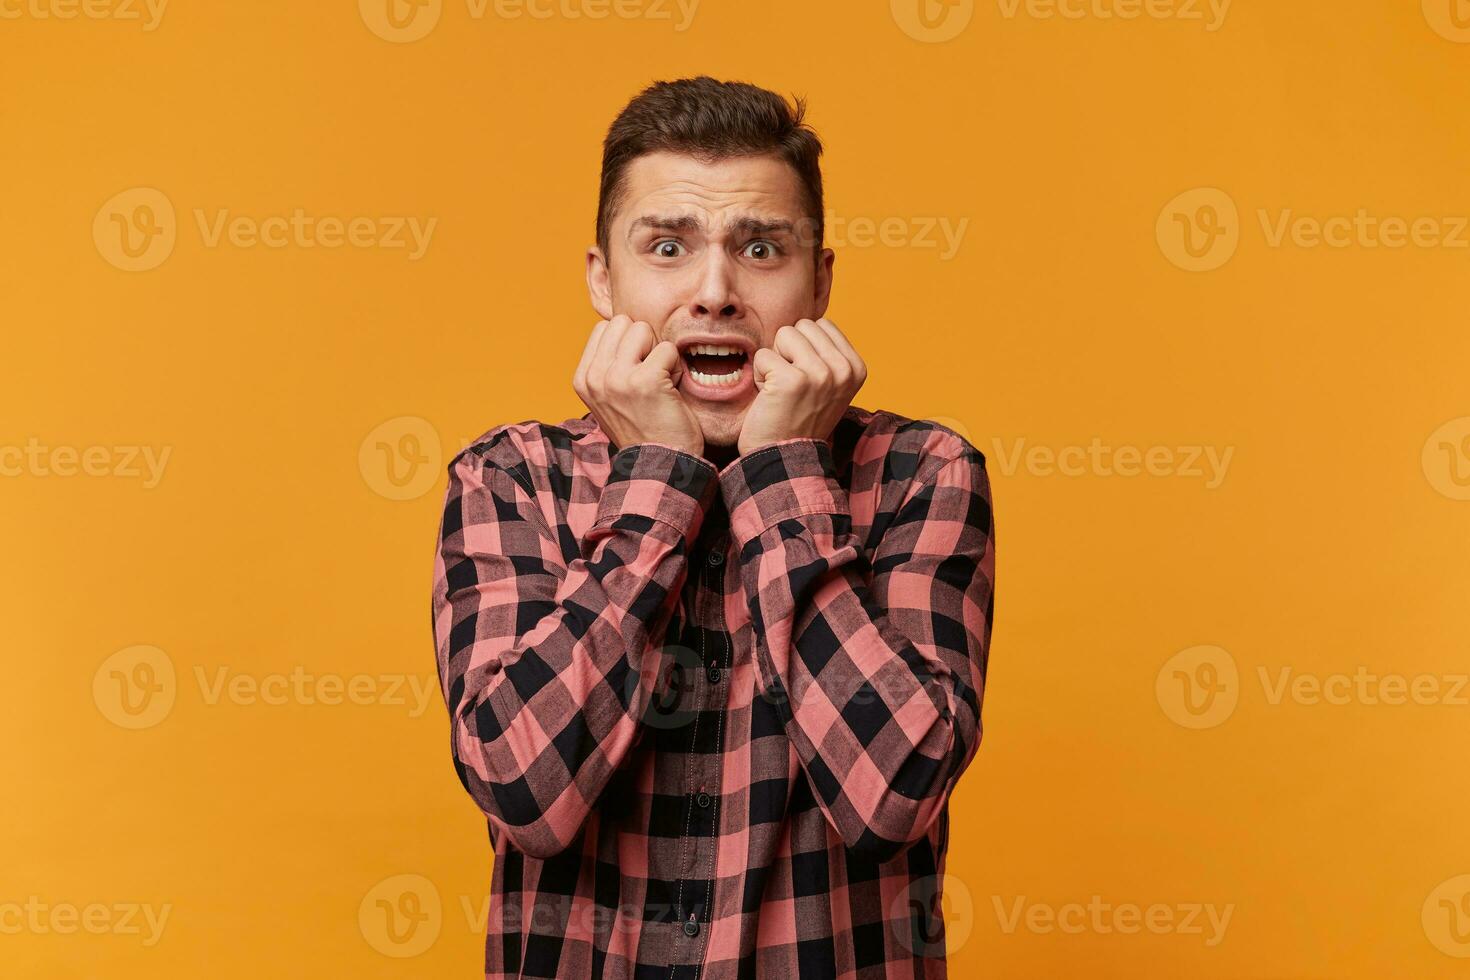 Portrait of hysterical student guy looking in despair and panic, nervous on test, worried about the exam results, not knowing what to answer, hands near mouth, mouth opened in a shout photo